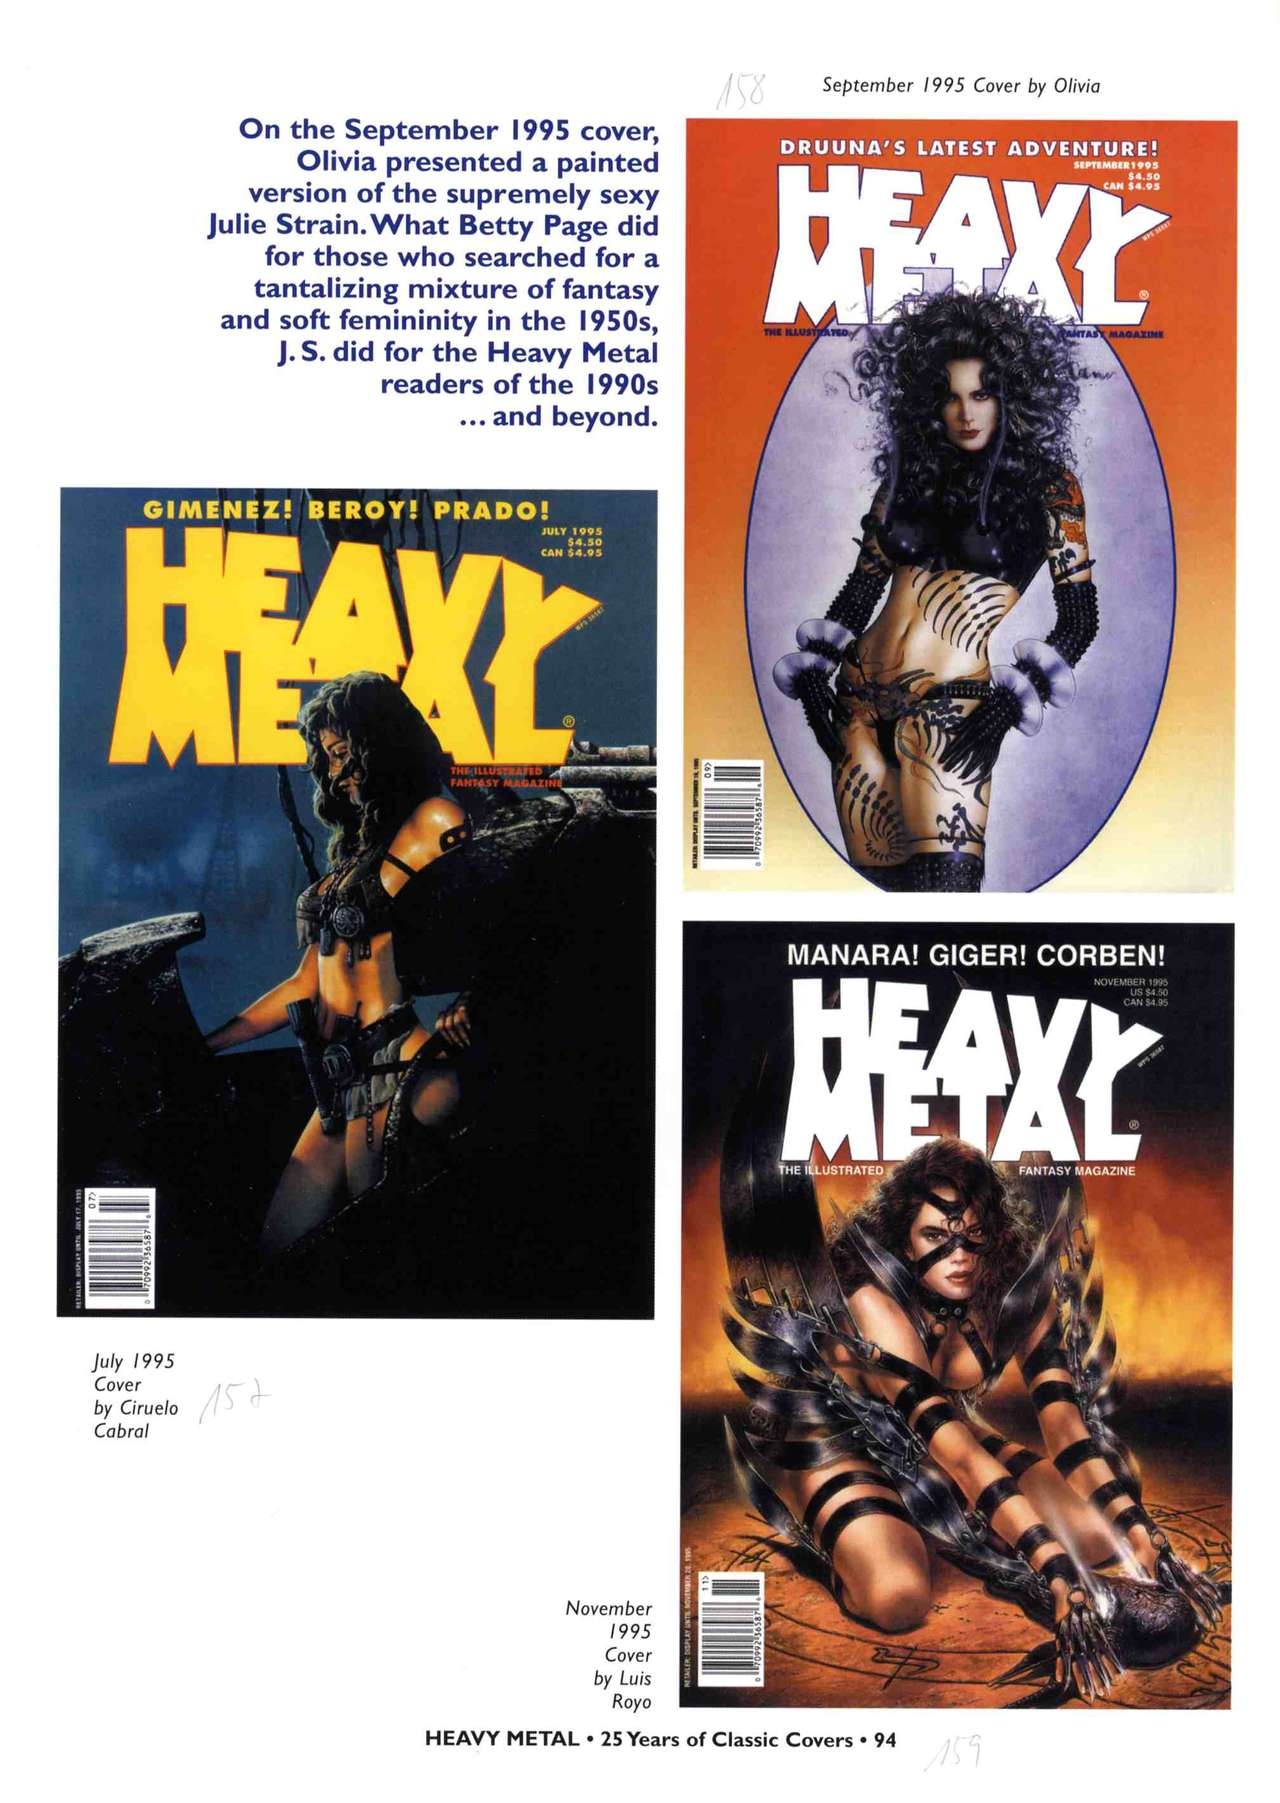 HEAVY METAL 25 Years of Classic Covers 99